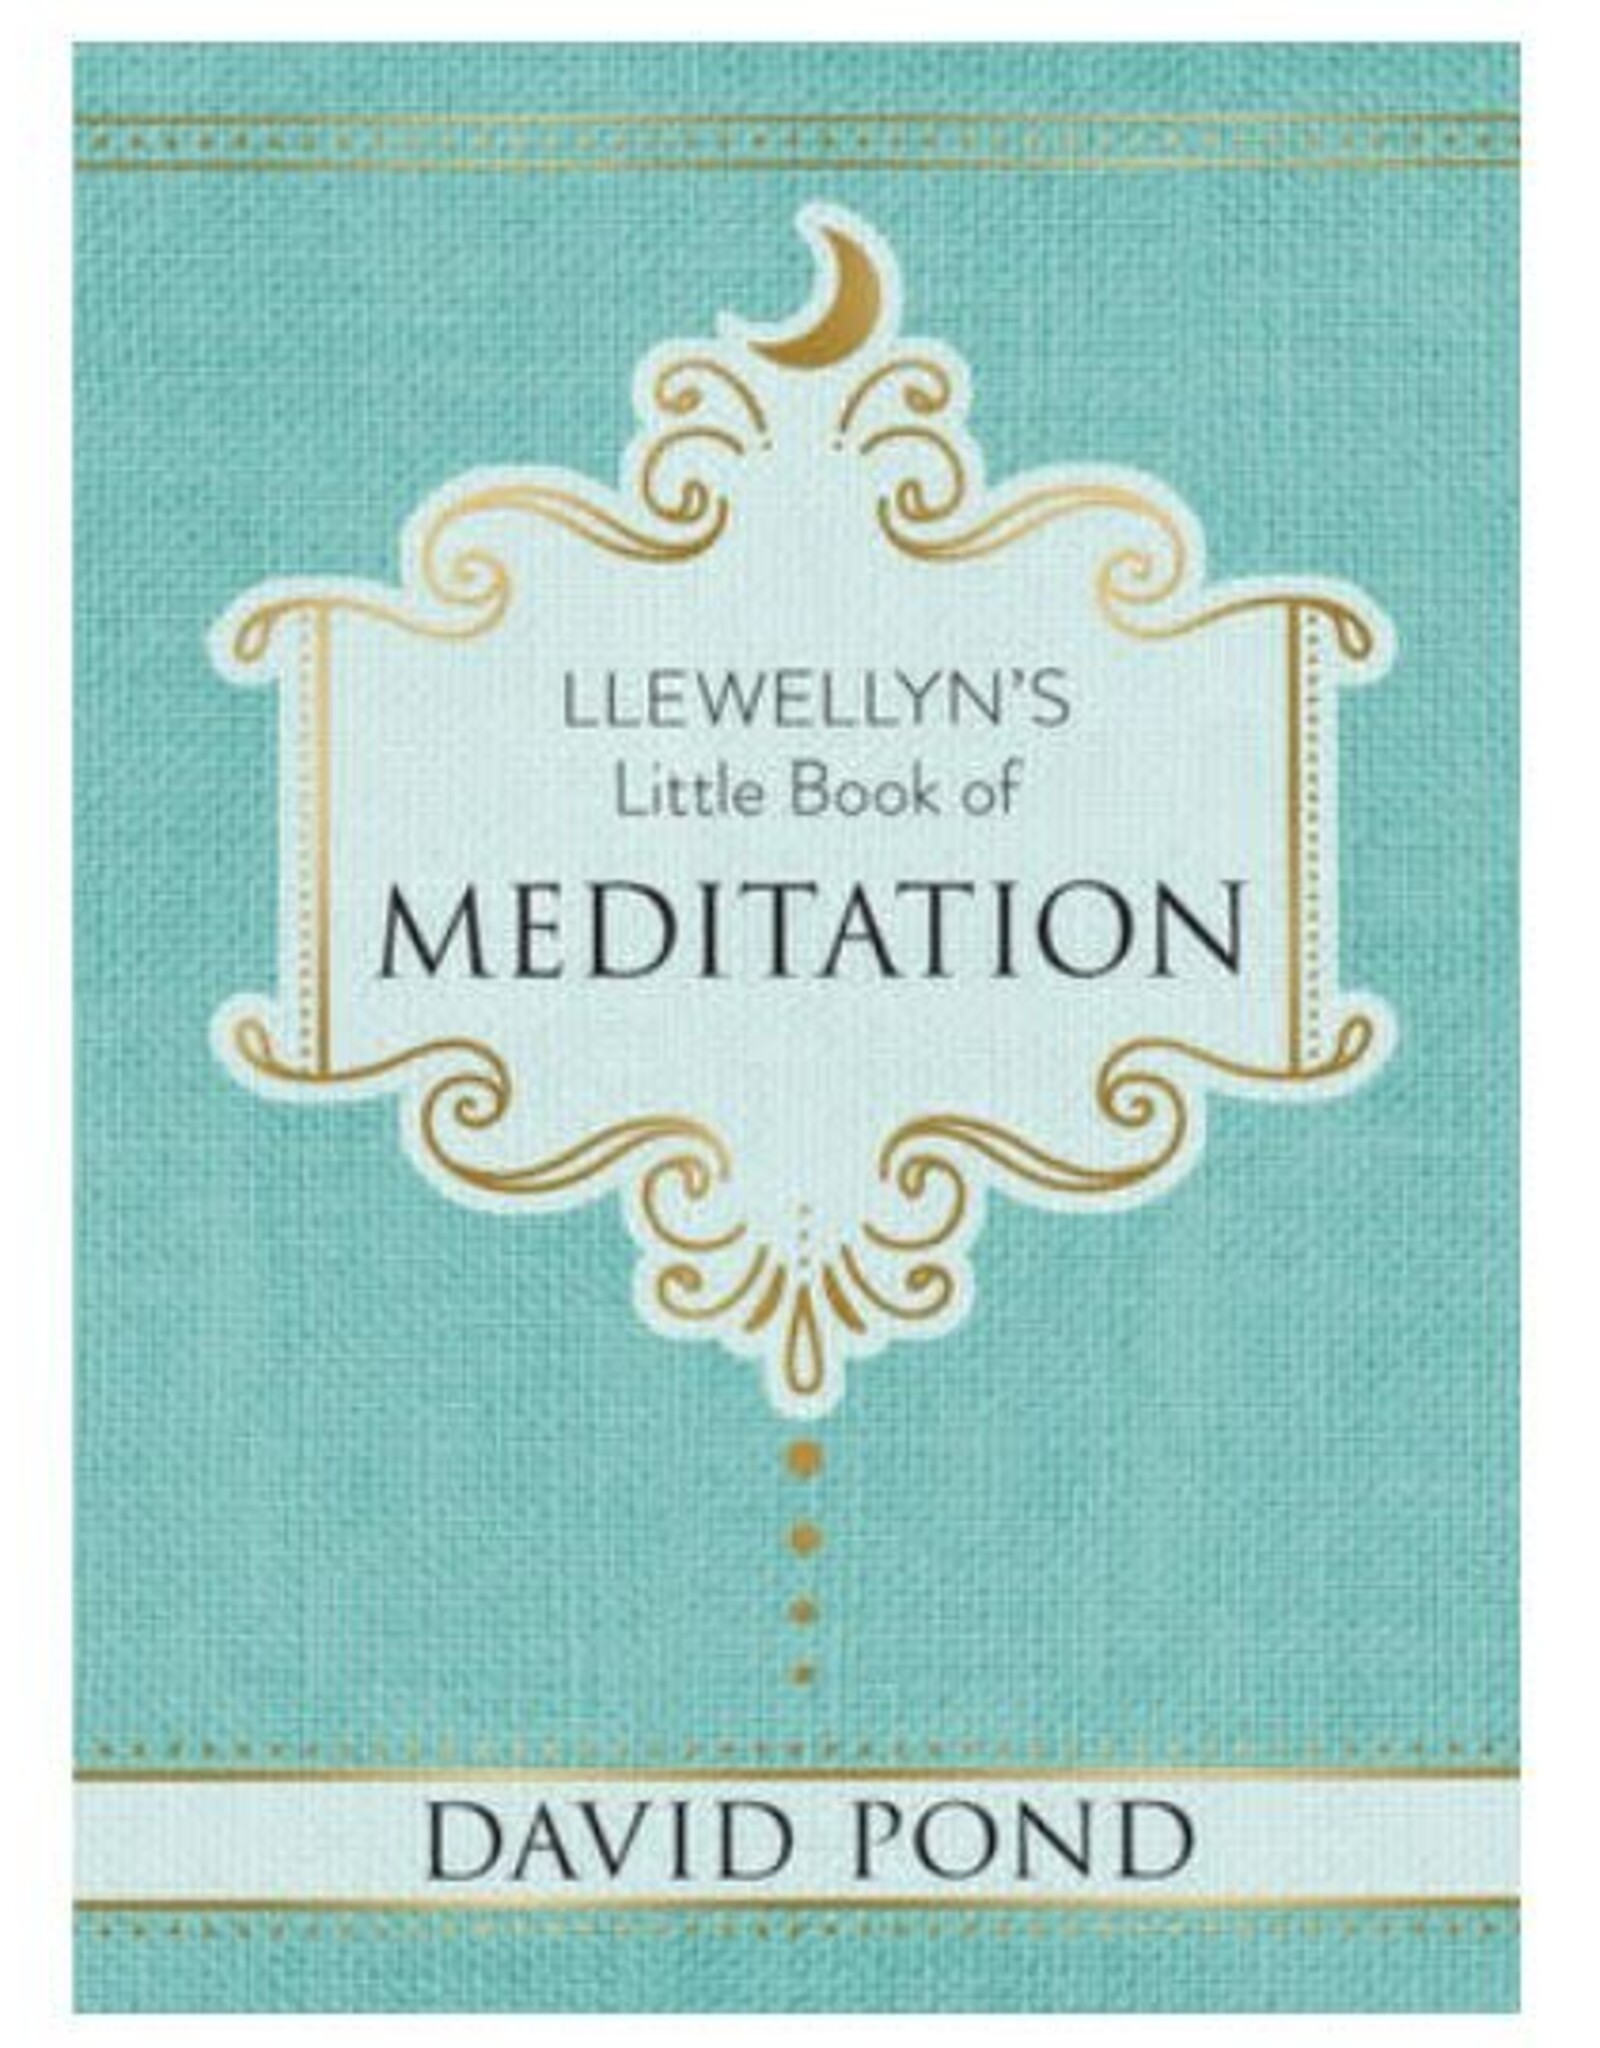 Llewellyn's Little Book of Meditation by David Pond